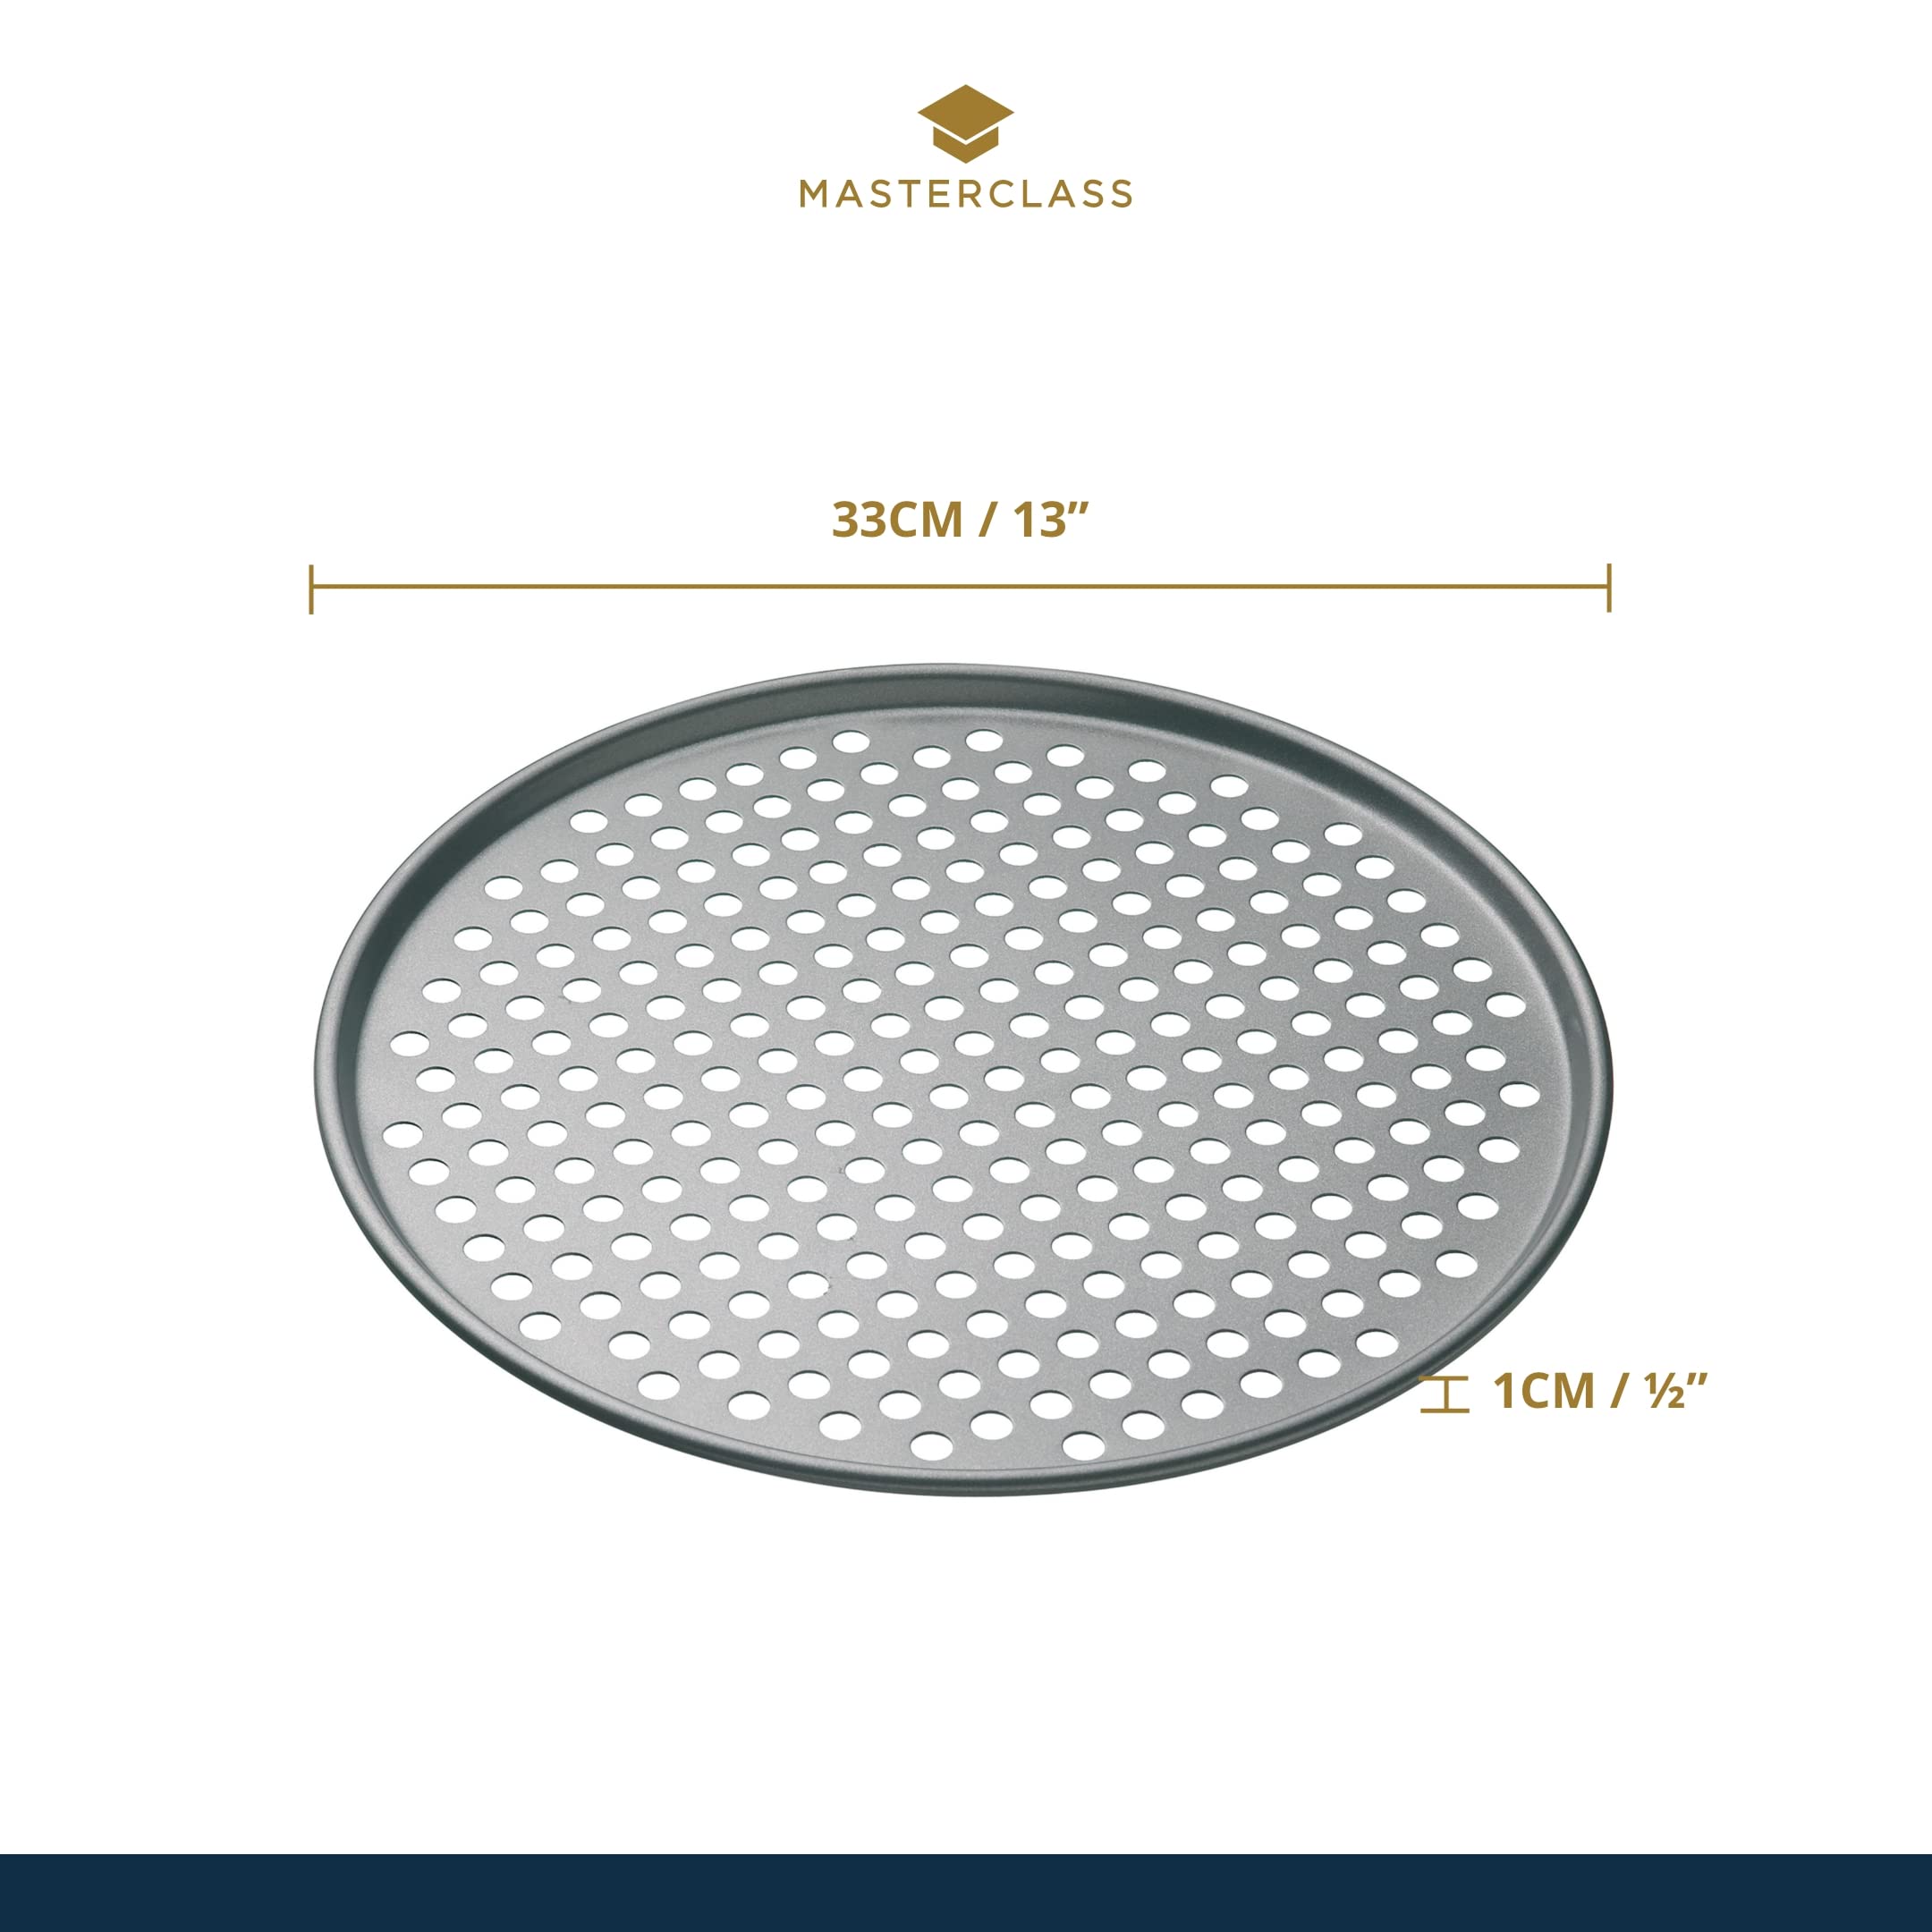 Master Class KCMCHB14 Perforated Pizza Tray, Grey, 32cm